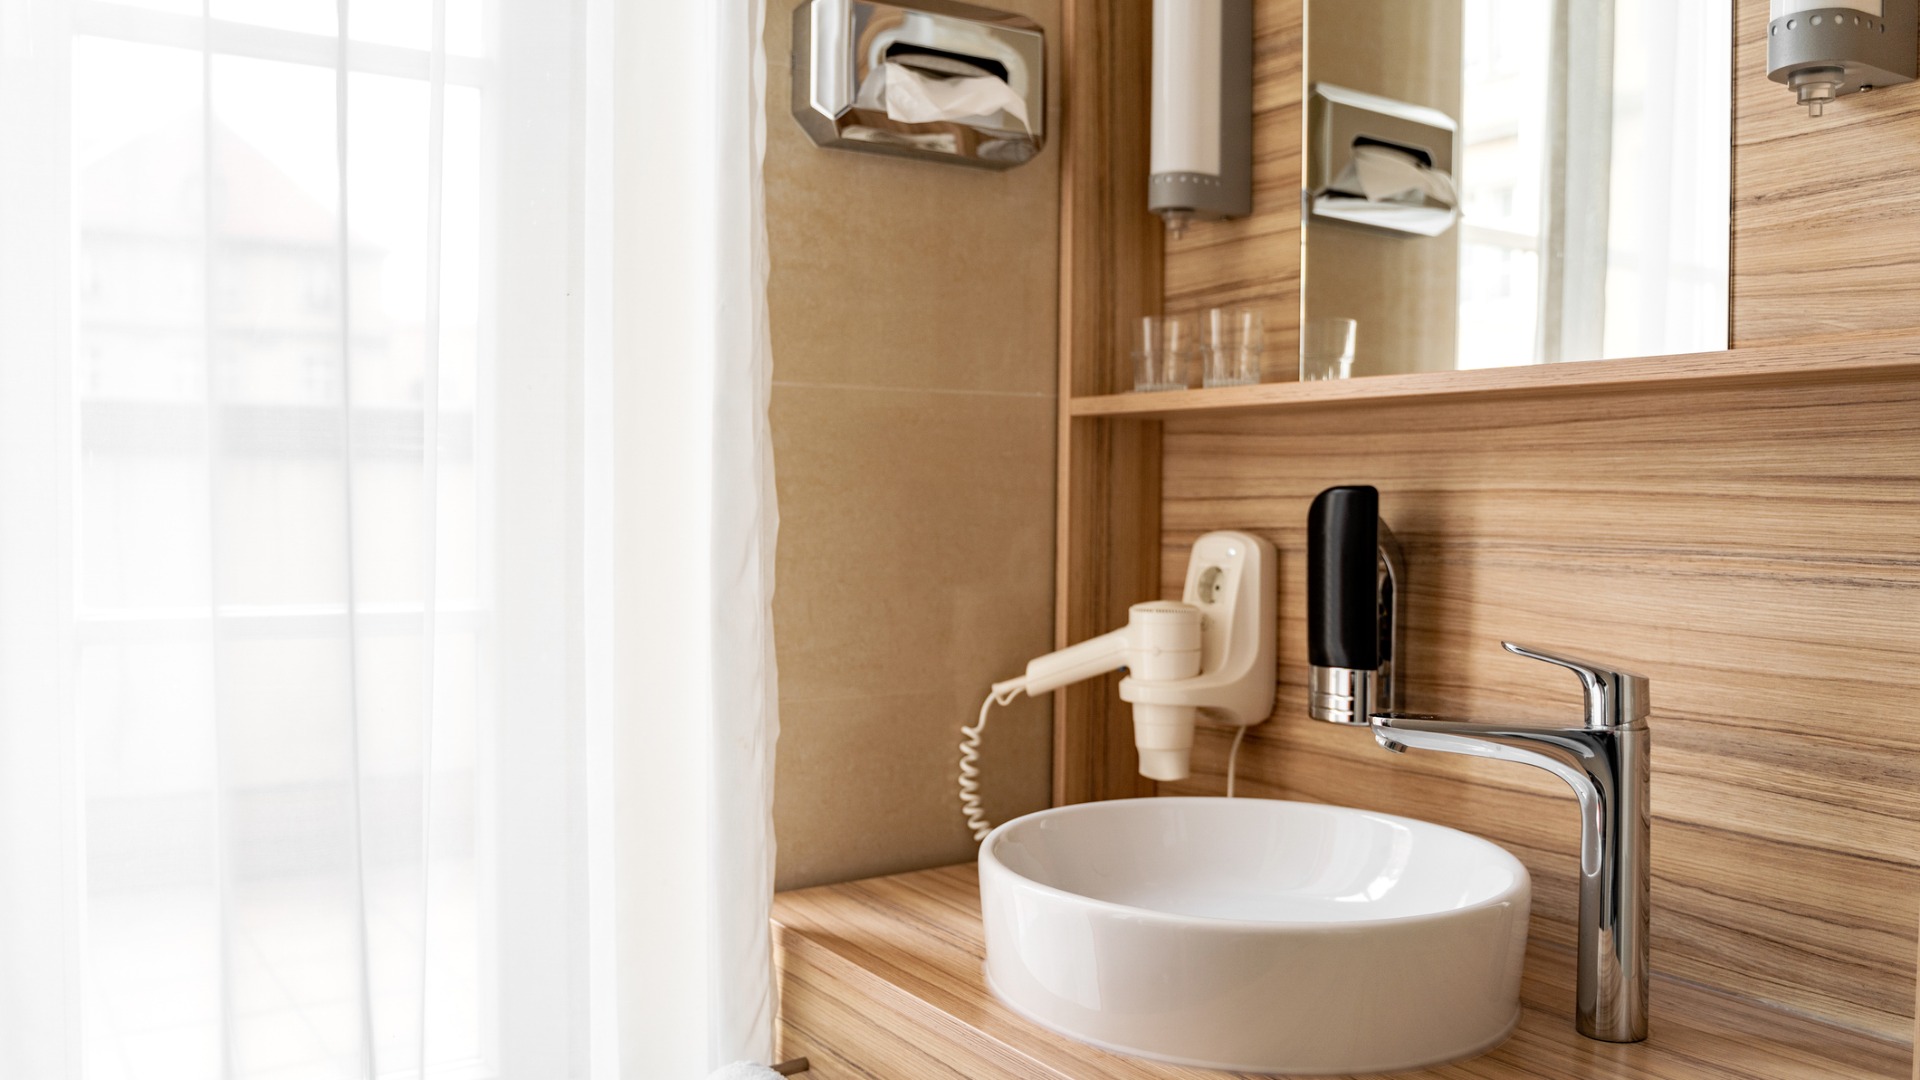 This image shows a small bathroom in a hotel room with window, sink, faucet, hair dryer and mirror.